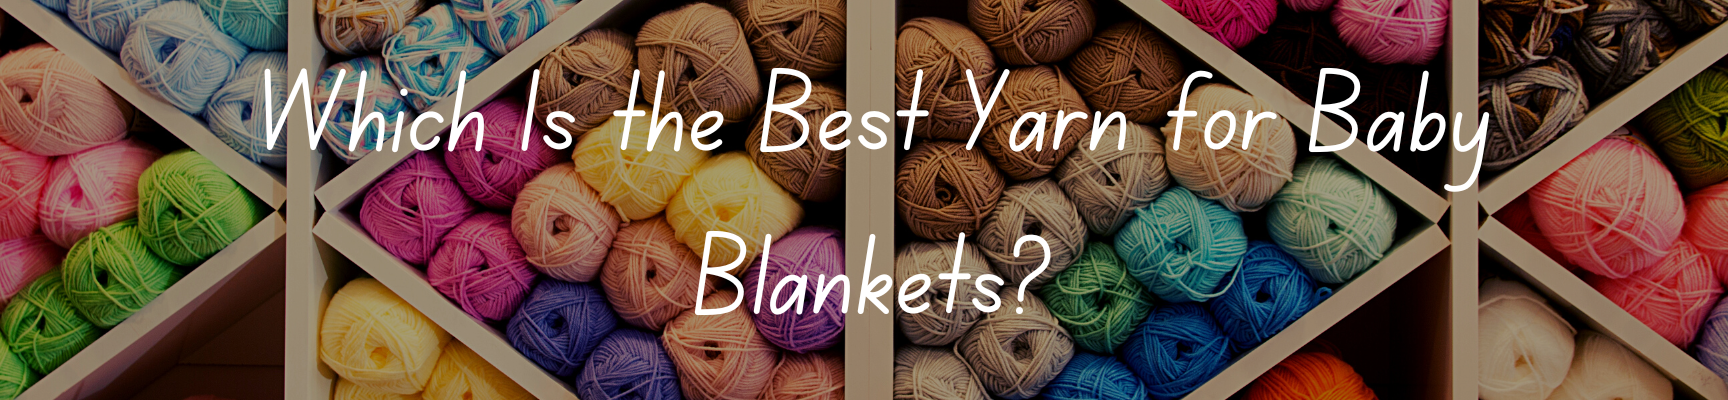 Which Is the Best Yarn for Baby Blankets